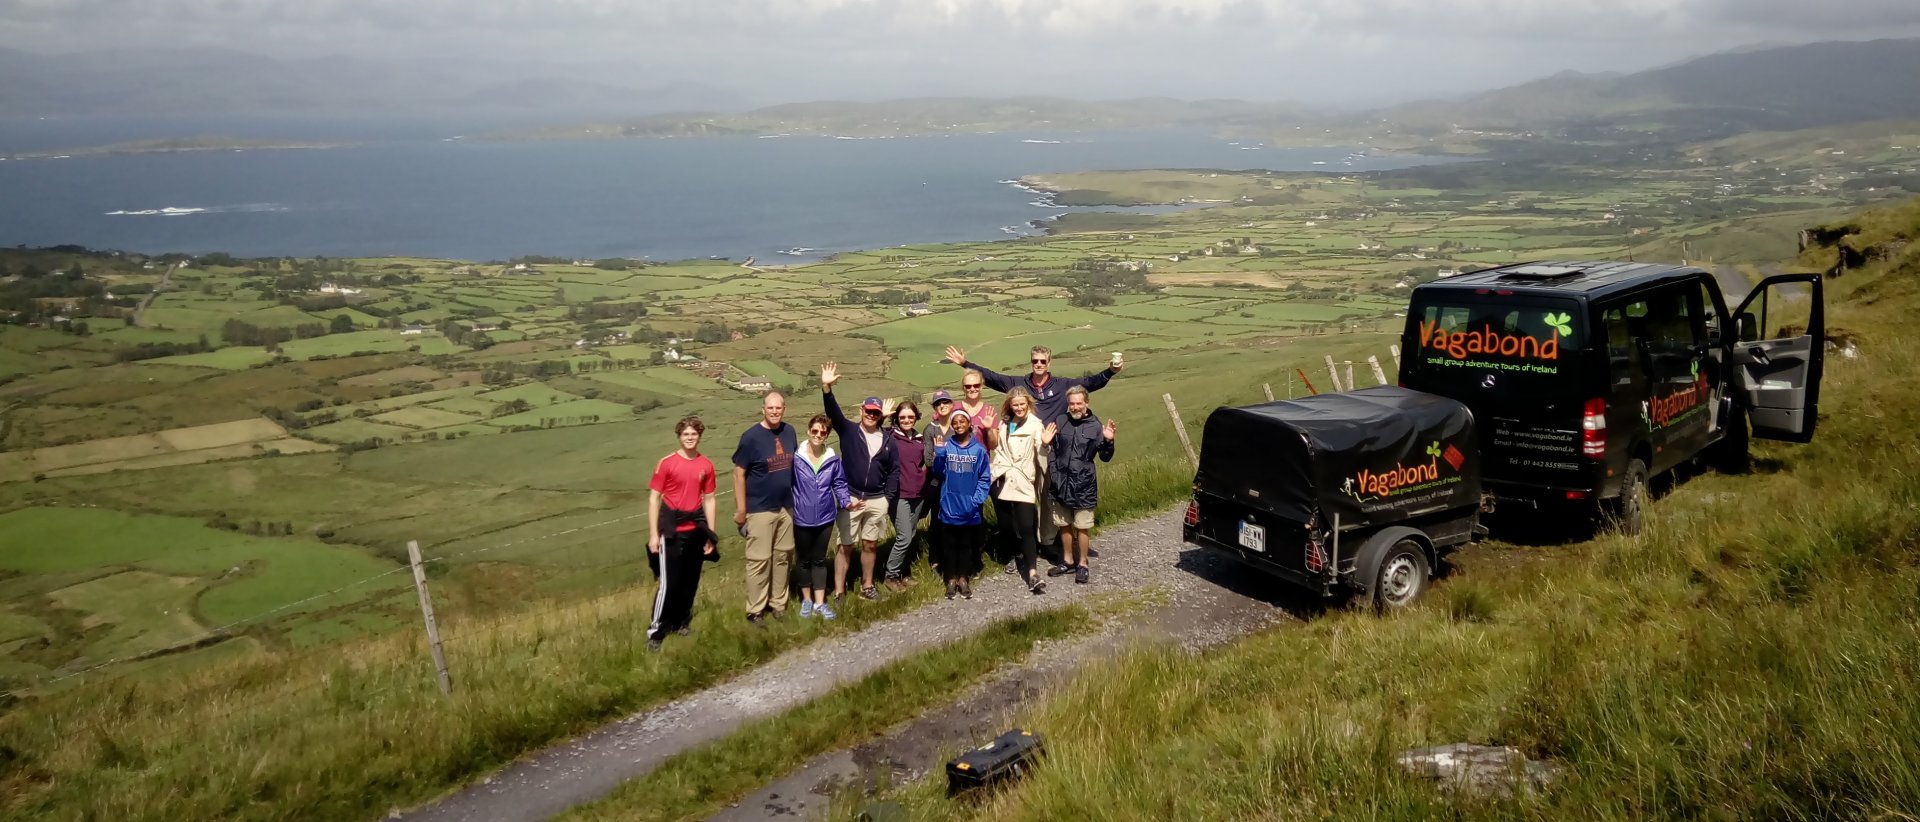 Active Guided Tours of Ireland Vagabond Tours